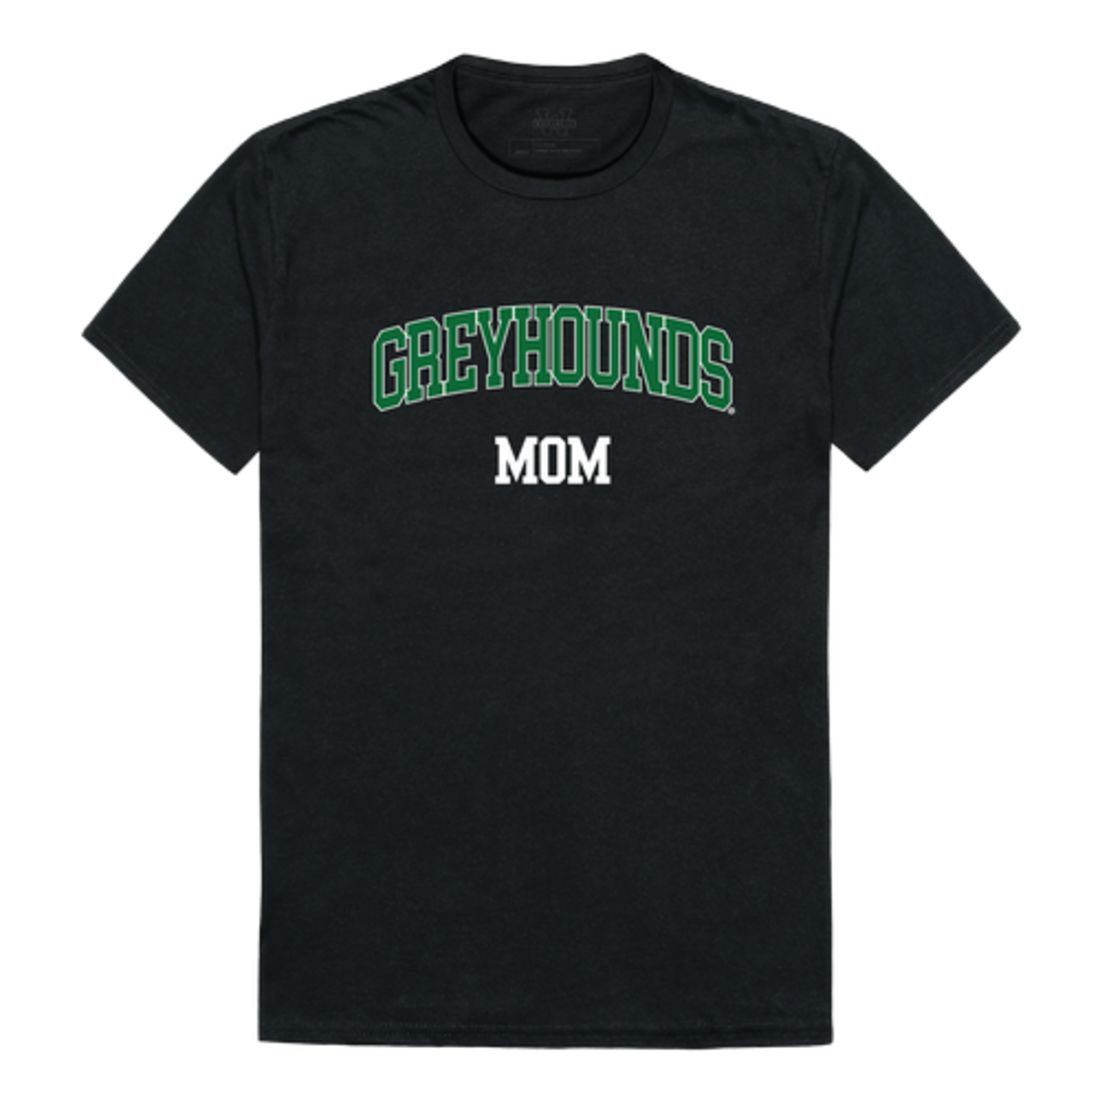 Eastern New Mexico University Greyhounds Mom T-Shirt